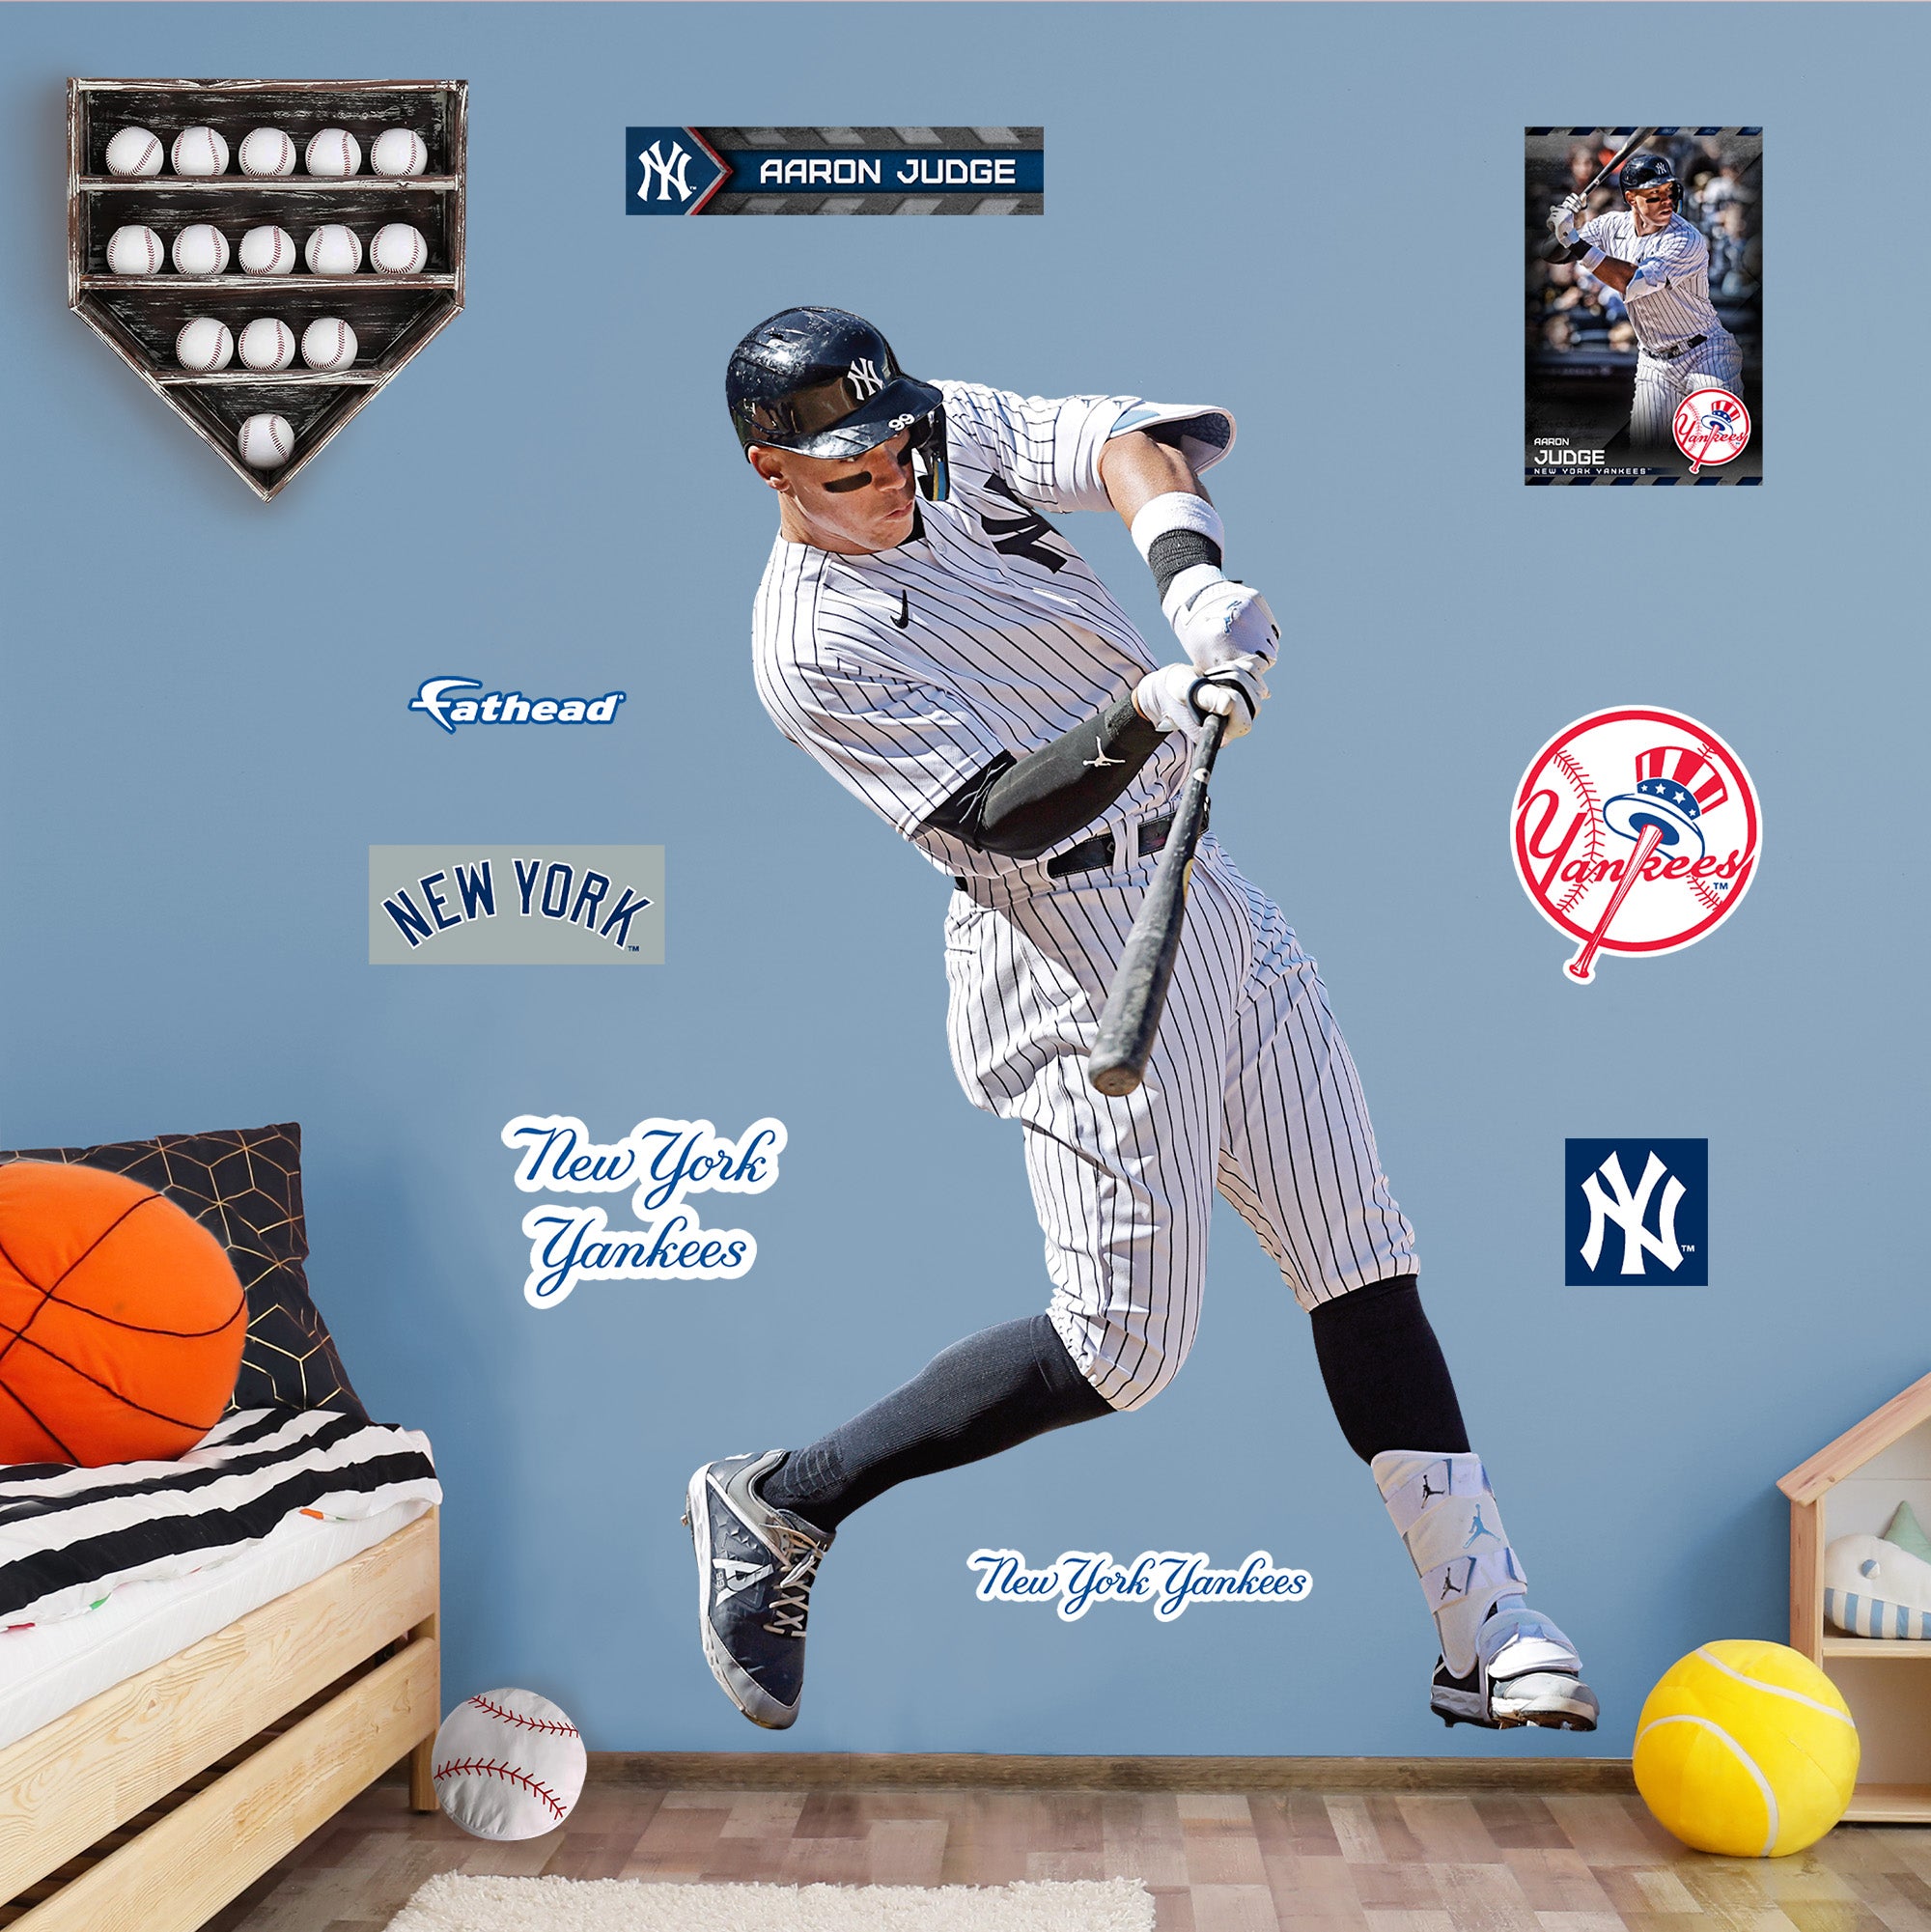 New York Yankees: Aaron Judge 2022 62nd Home Run - Officially Licensed –  Fathead